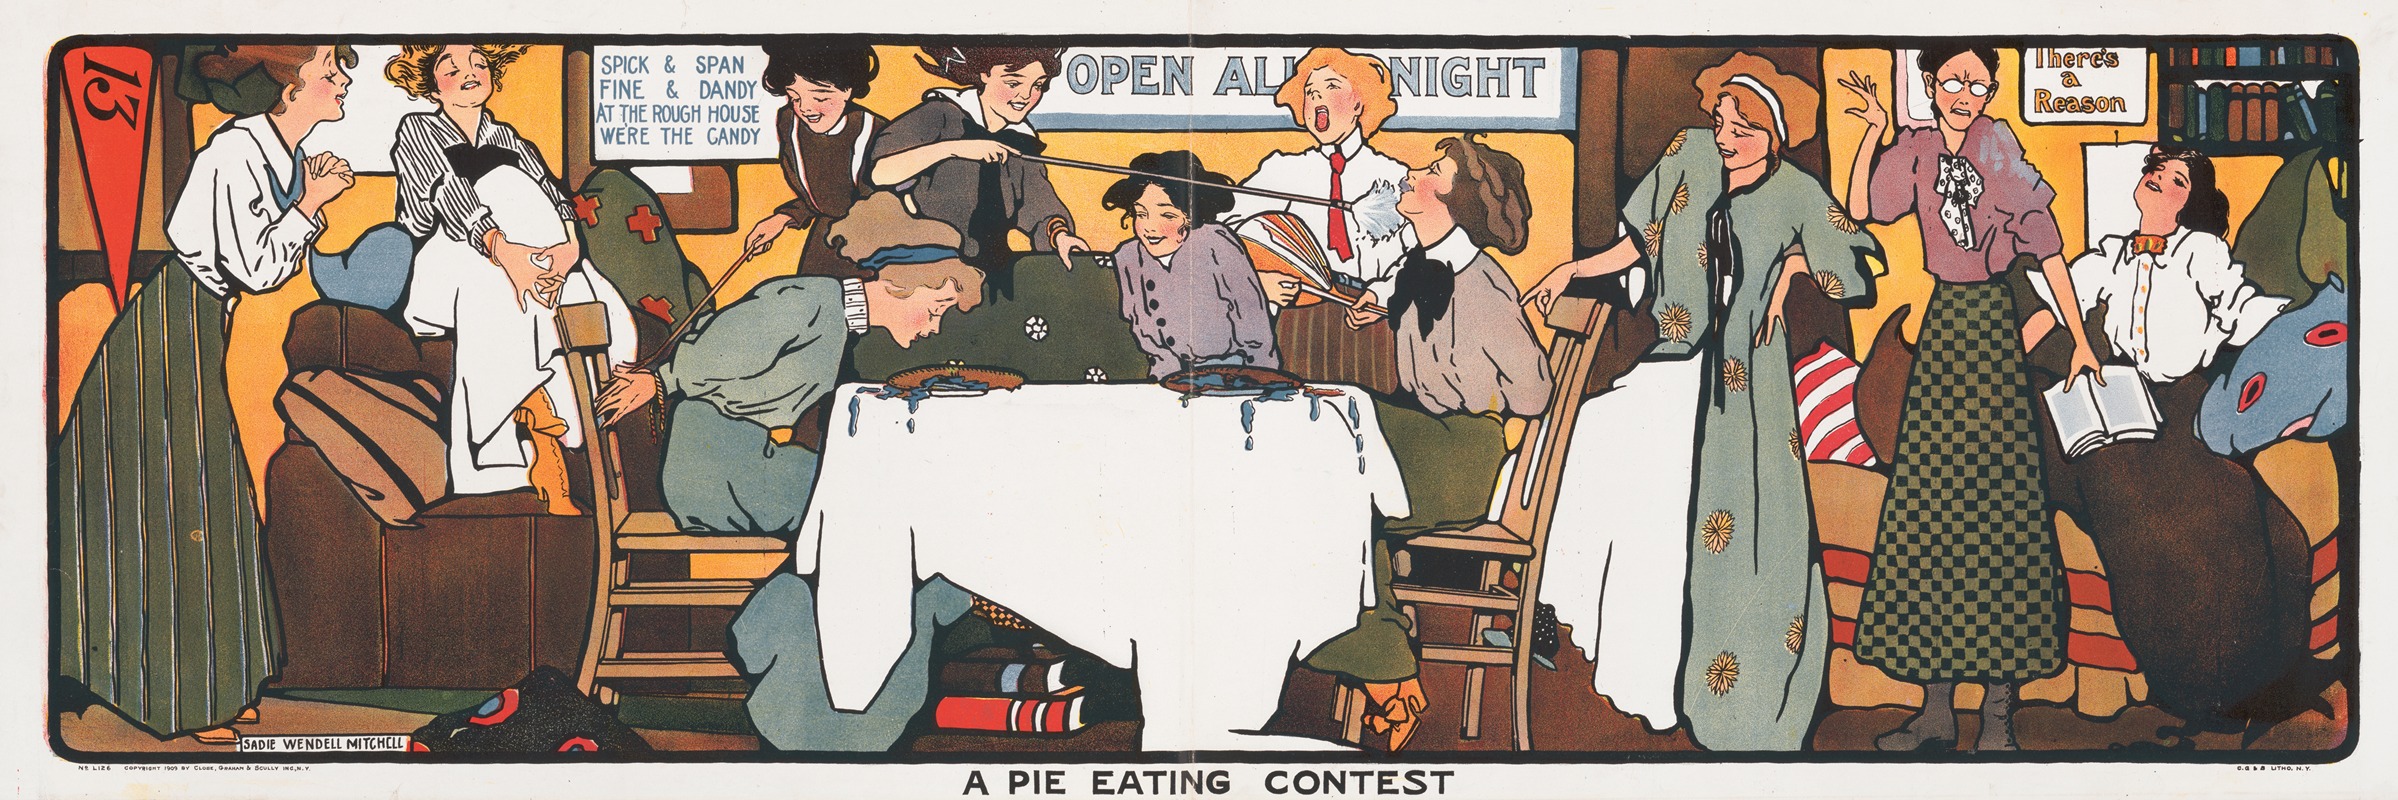 Sadie Wendell Mitchell - A pie eating contest